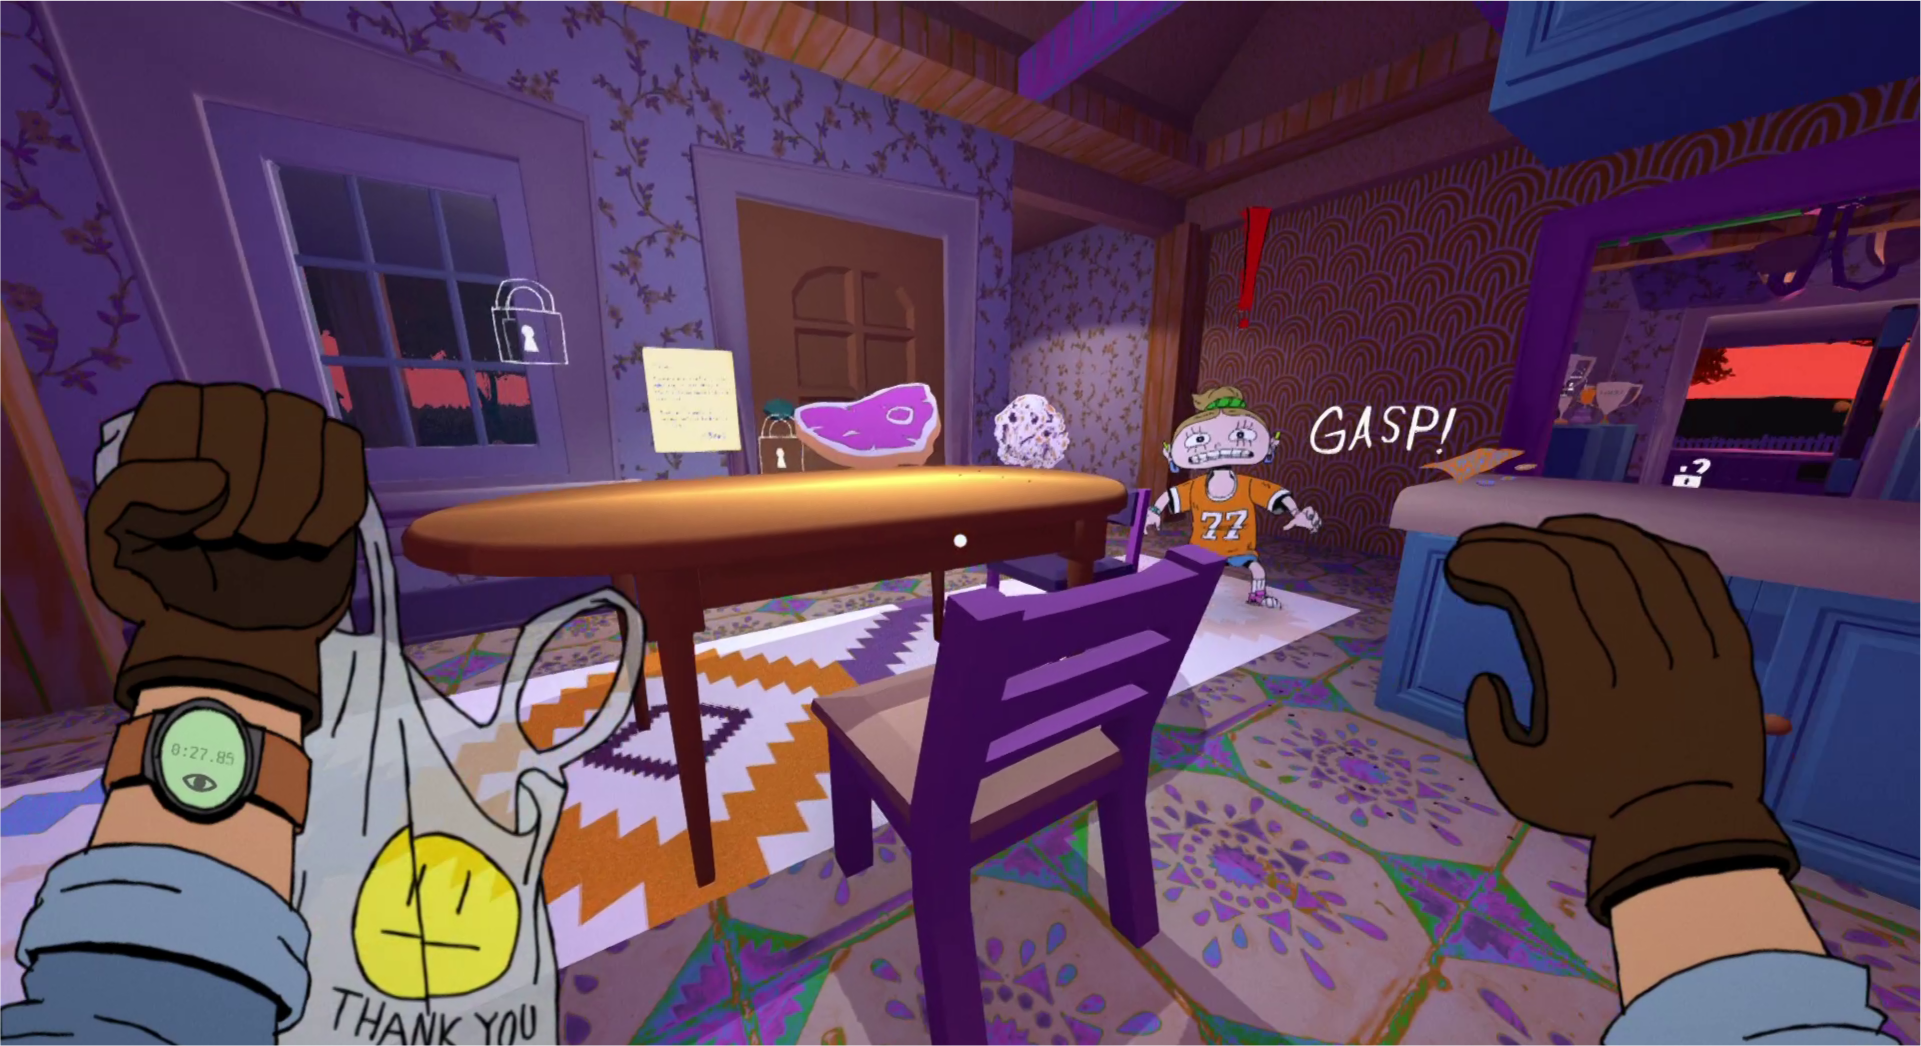 Screenshot. The player is caught stealing by a young woman, who gasps.